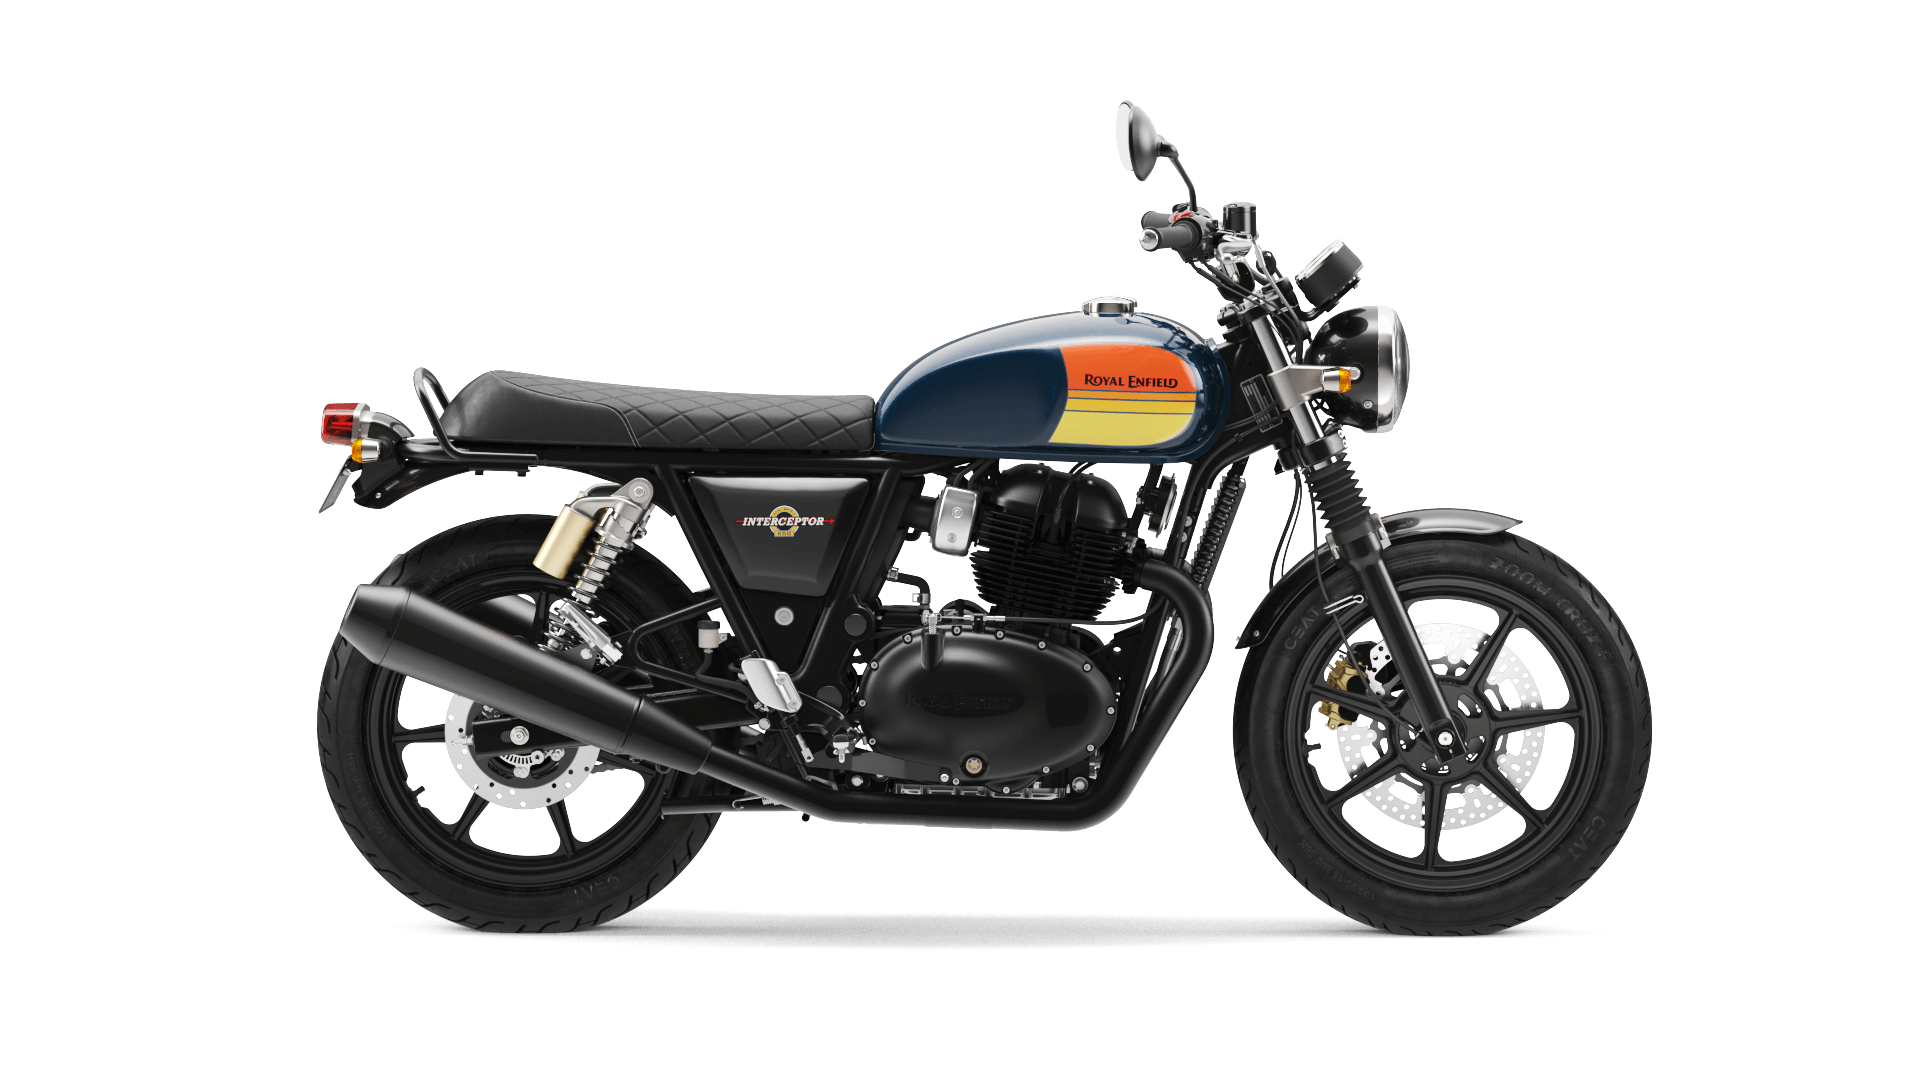 RE Interceptor 650 Price, Colours, Images & Mileage in UK | Royal Enfield